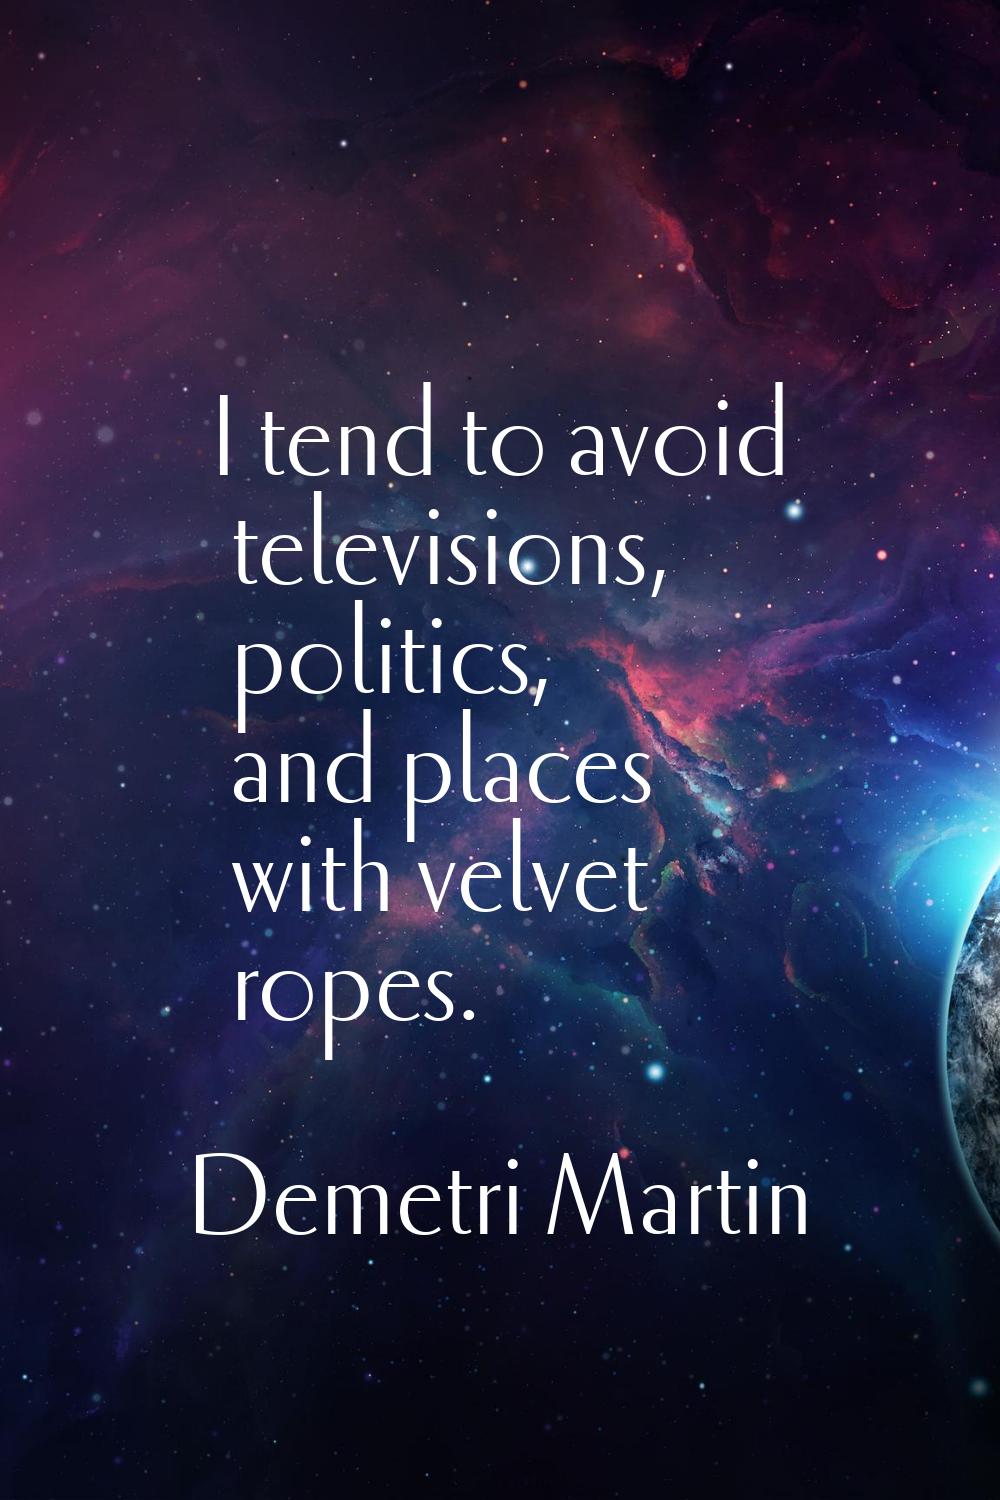 I tend to avoid televisions, politics, and places with velvet ropes.